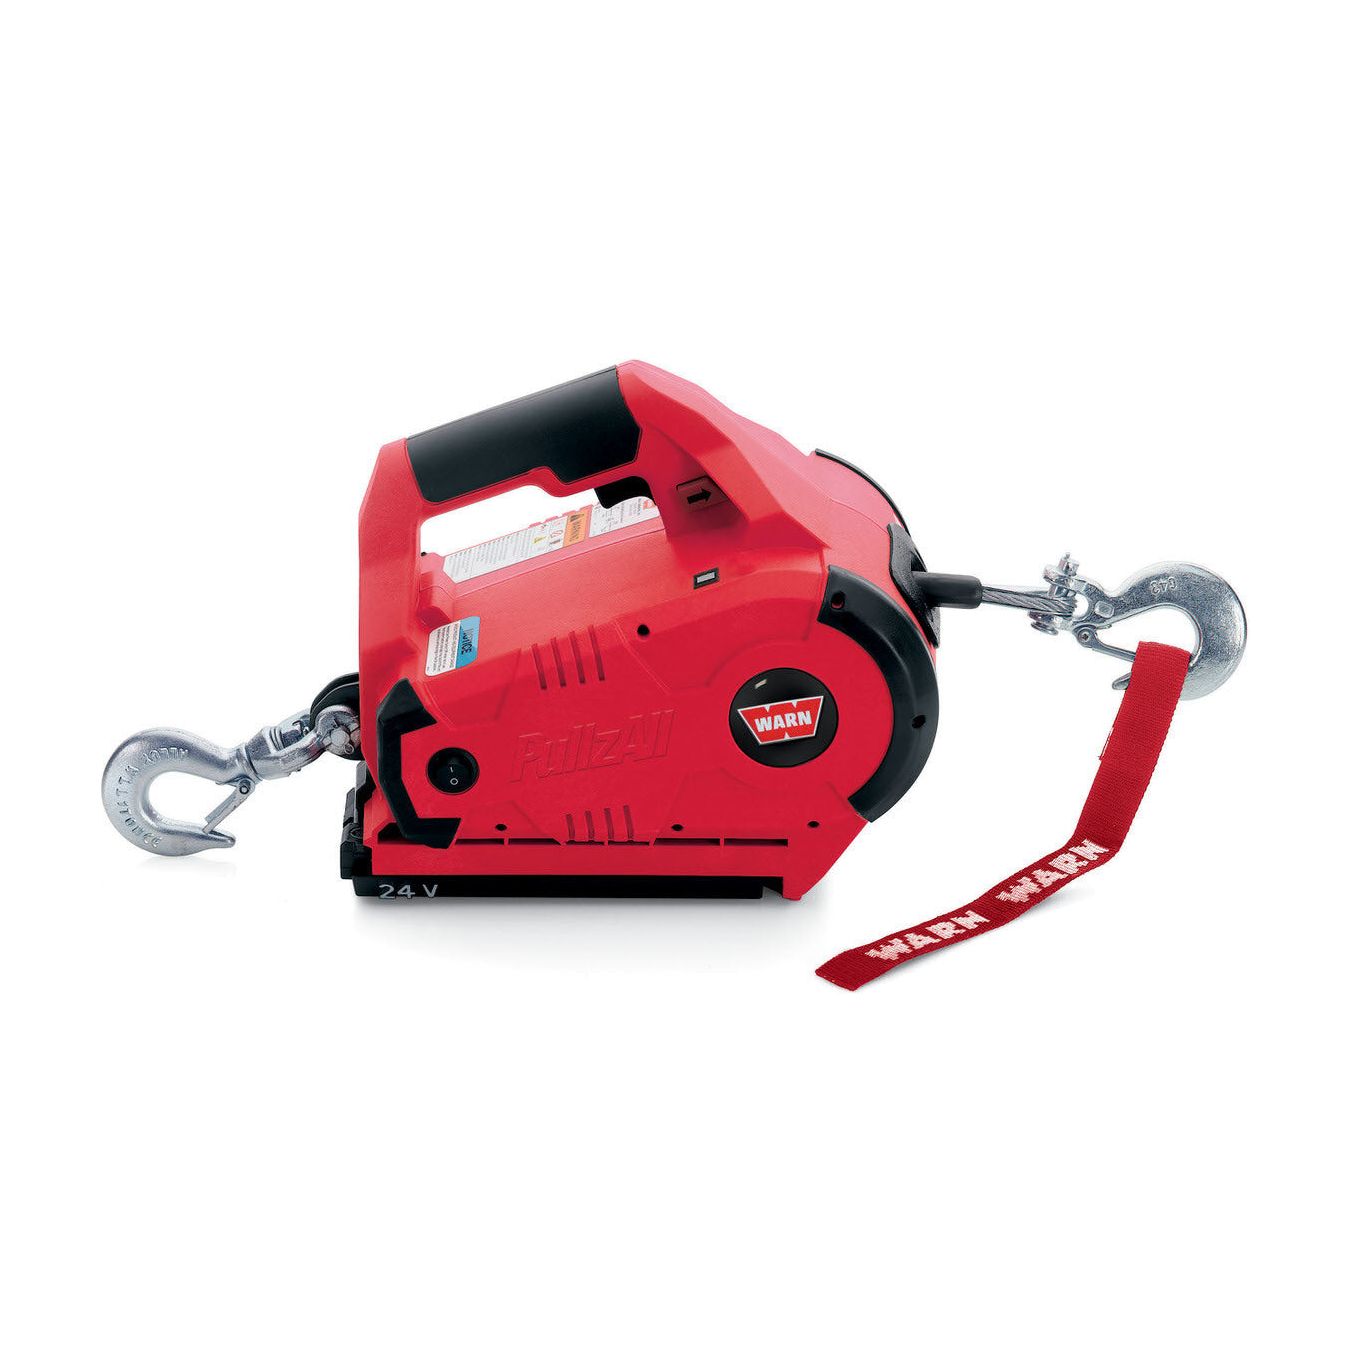 Warn 24 Volt DC, 1,000lbs Line Pull Cordless Portable, Lifting and Pulling Winch 885030